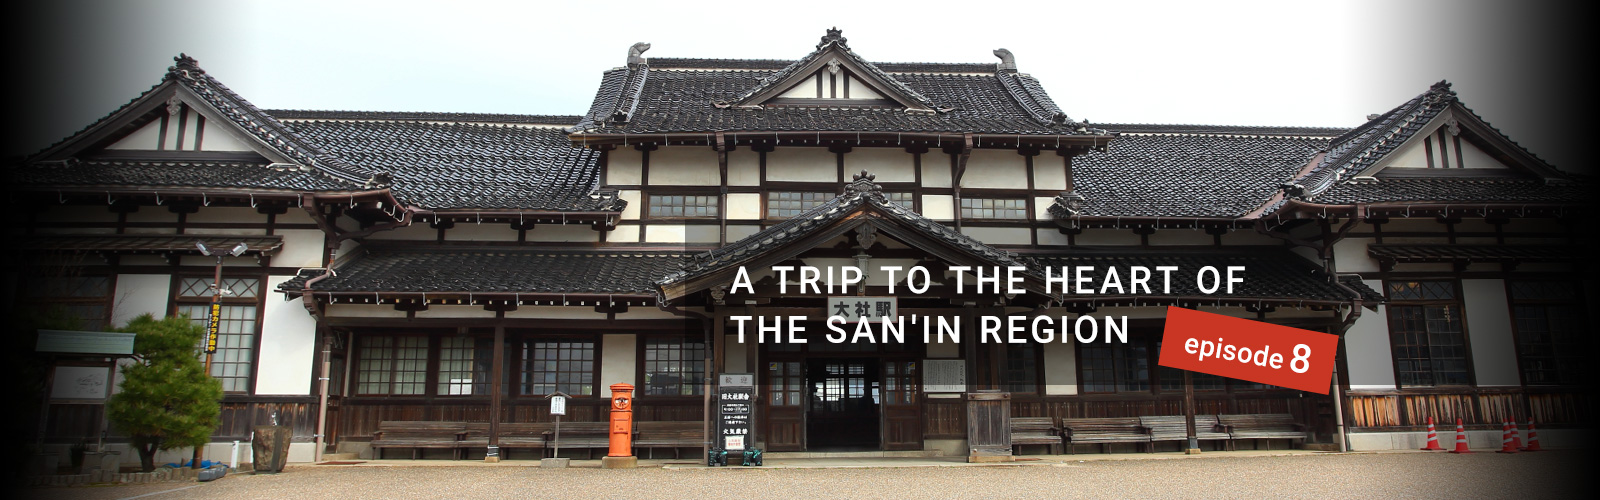 Story - Episode8 | A TRIP TO THE HEART OF THE SAN'IN REGION